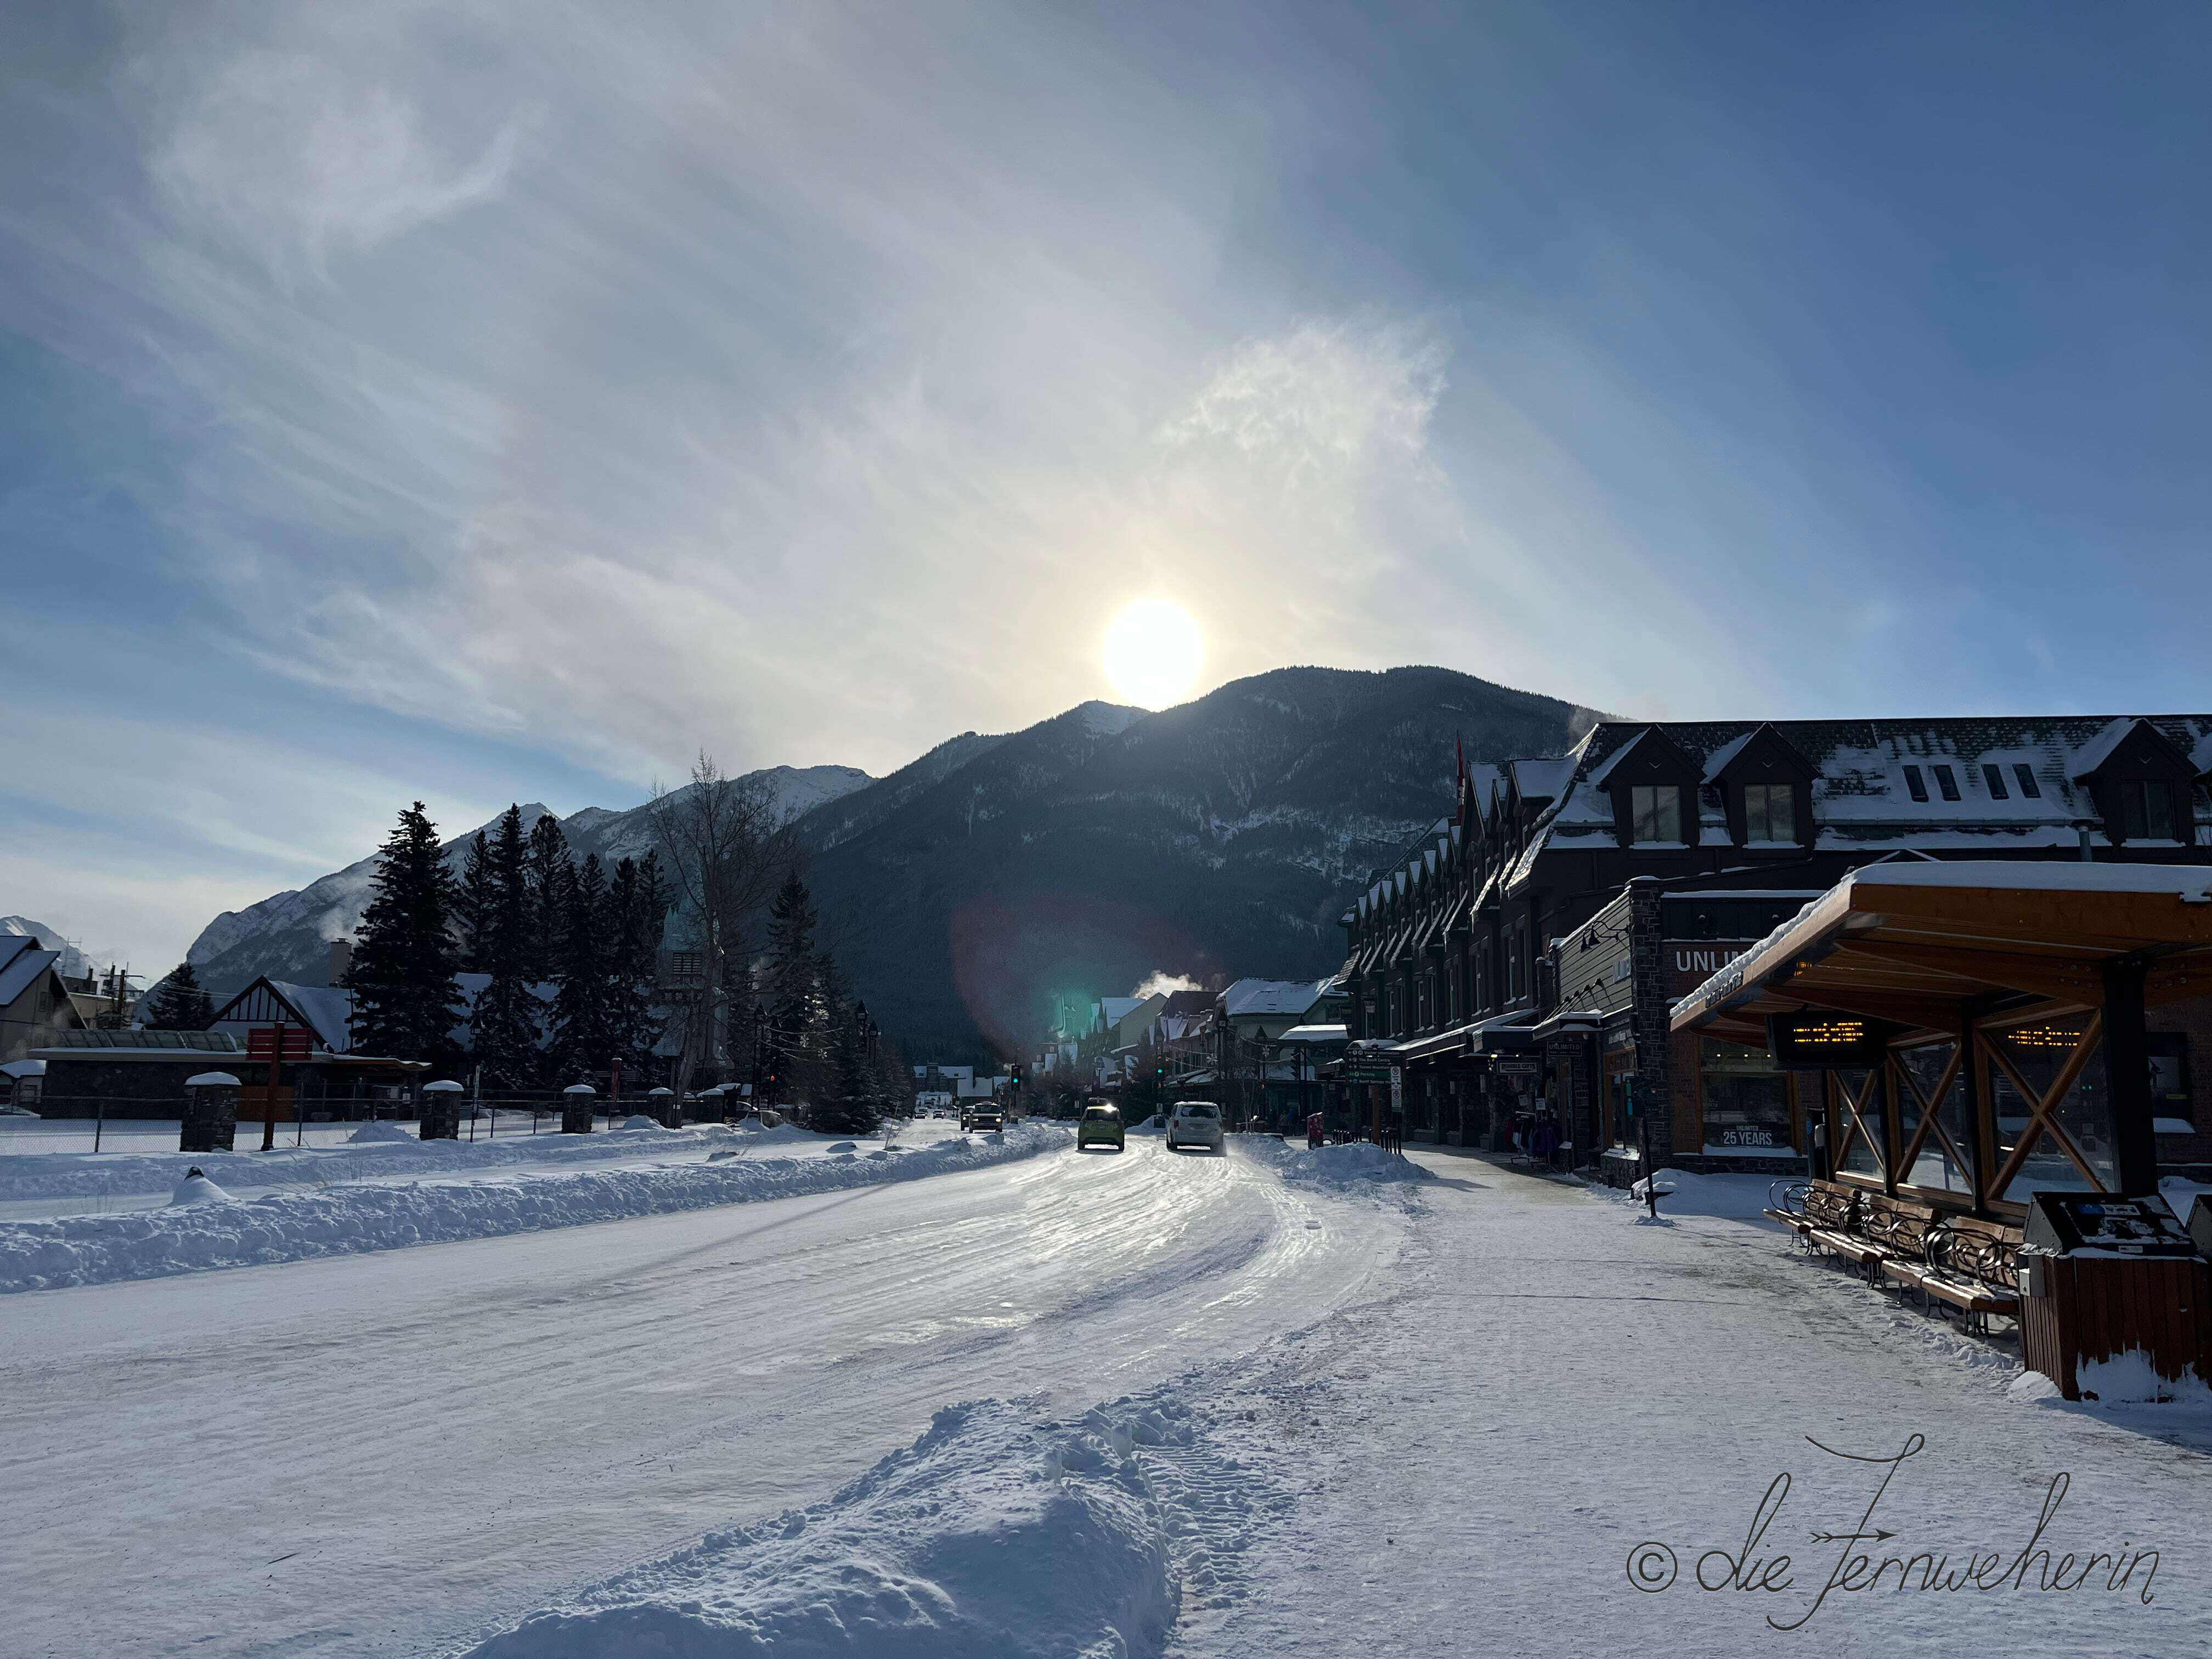 View of downtown Banff in the winter, as the sun sets behind Sulphur Mountain.